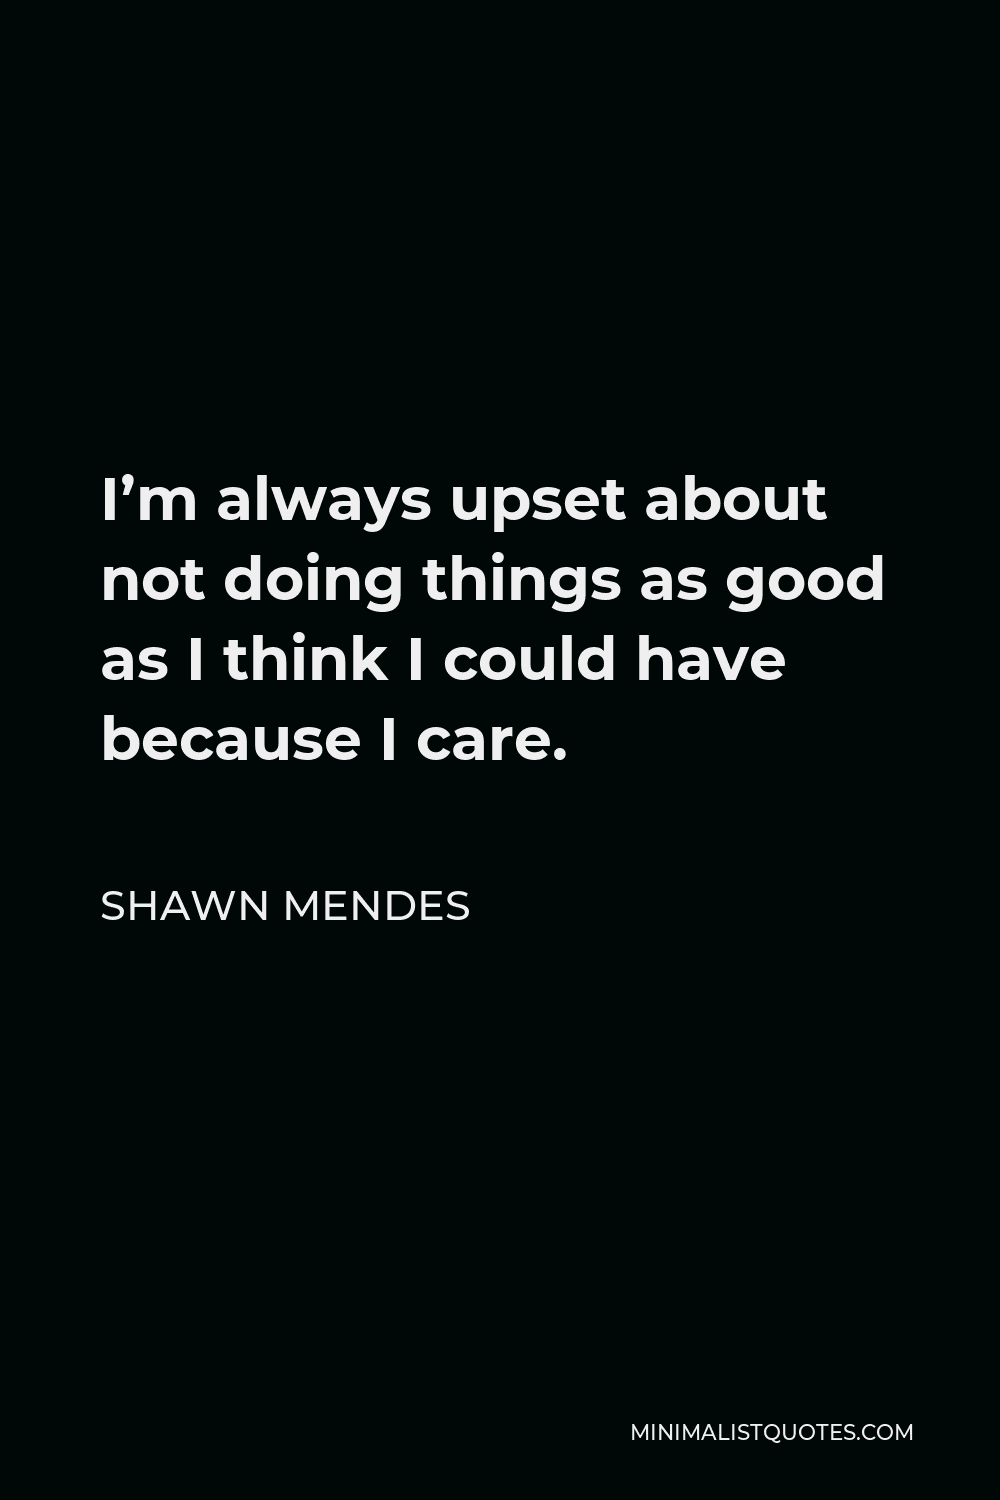 Shawn Mendes Quote - I’m always upset about not doing things as good as I think I could have because I care.